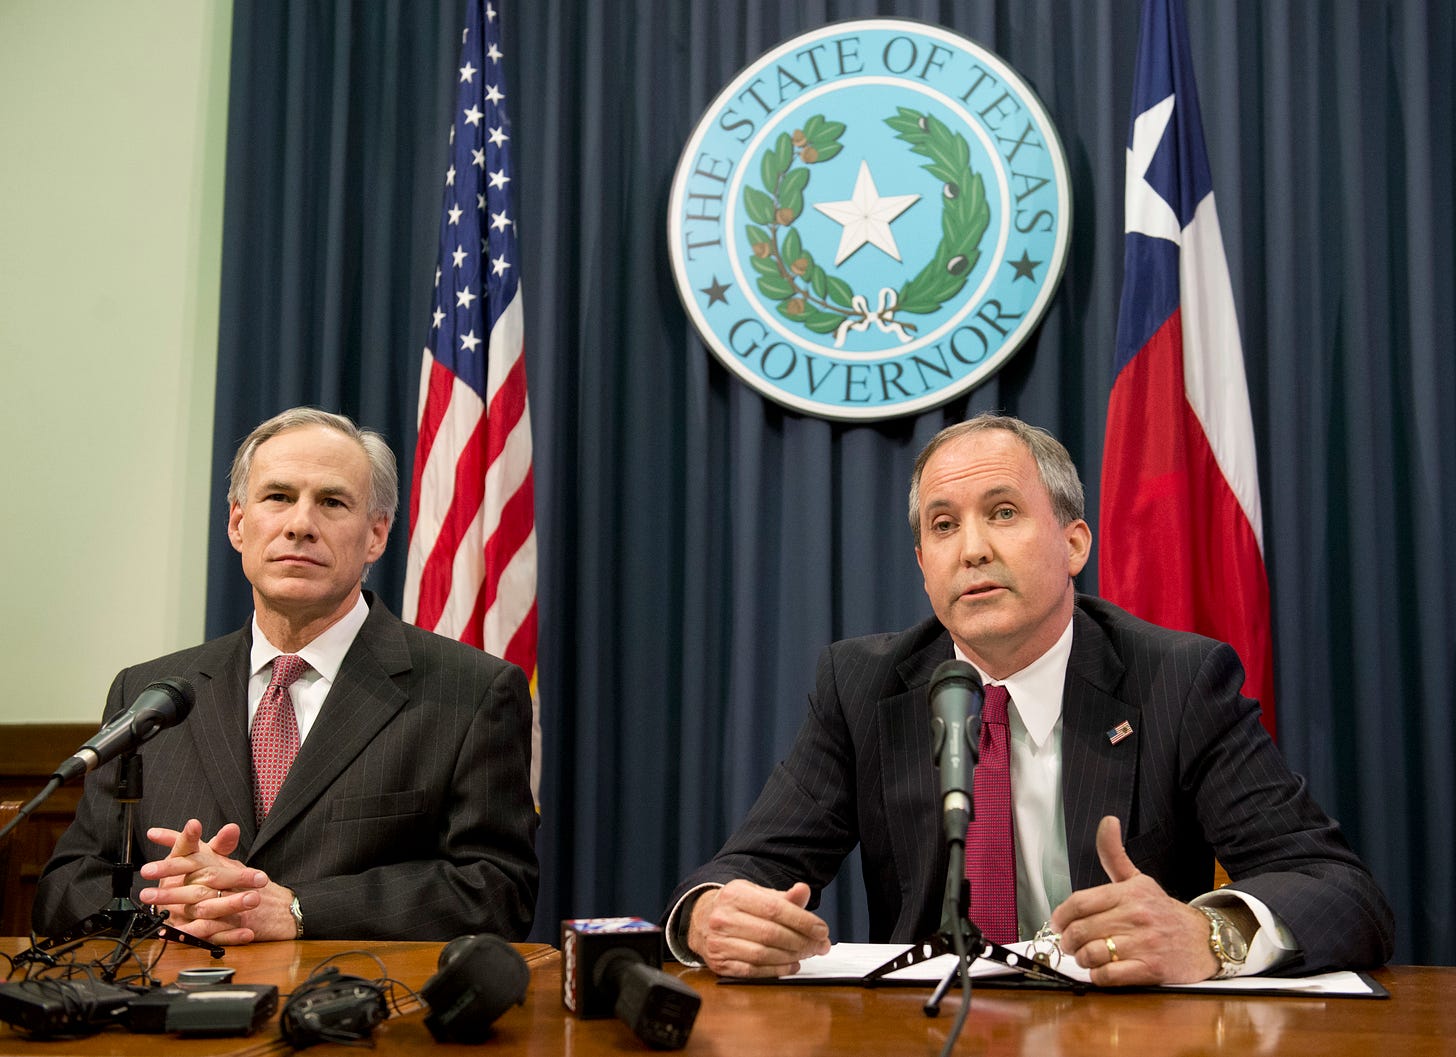 Texas Gov. Greg Abbott, l, and Attorney General Ken Paxton hold a press conference, seated at a brown desk in front of microphones, with the Texas and U.S. flag behind them, as well as the governor's seal.